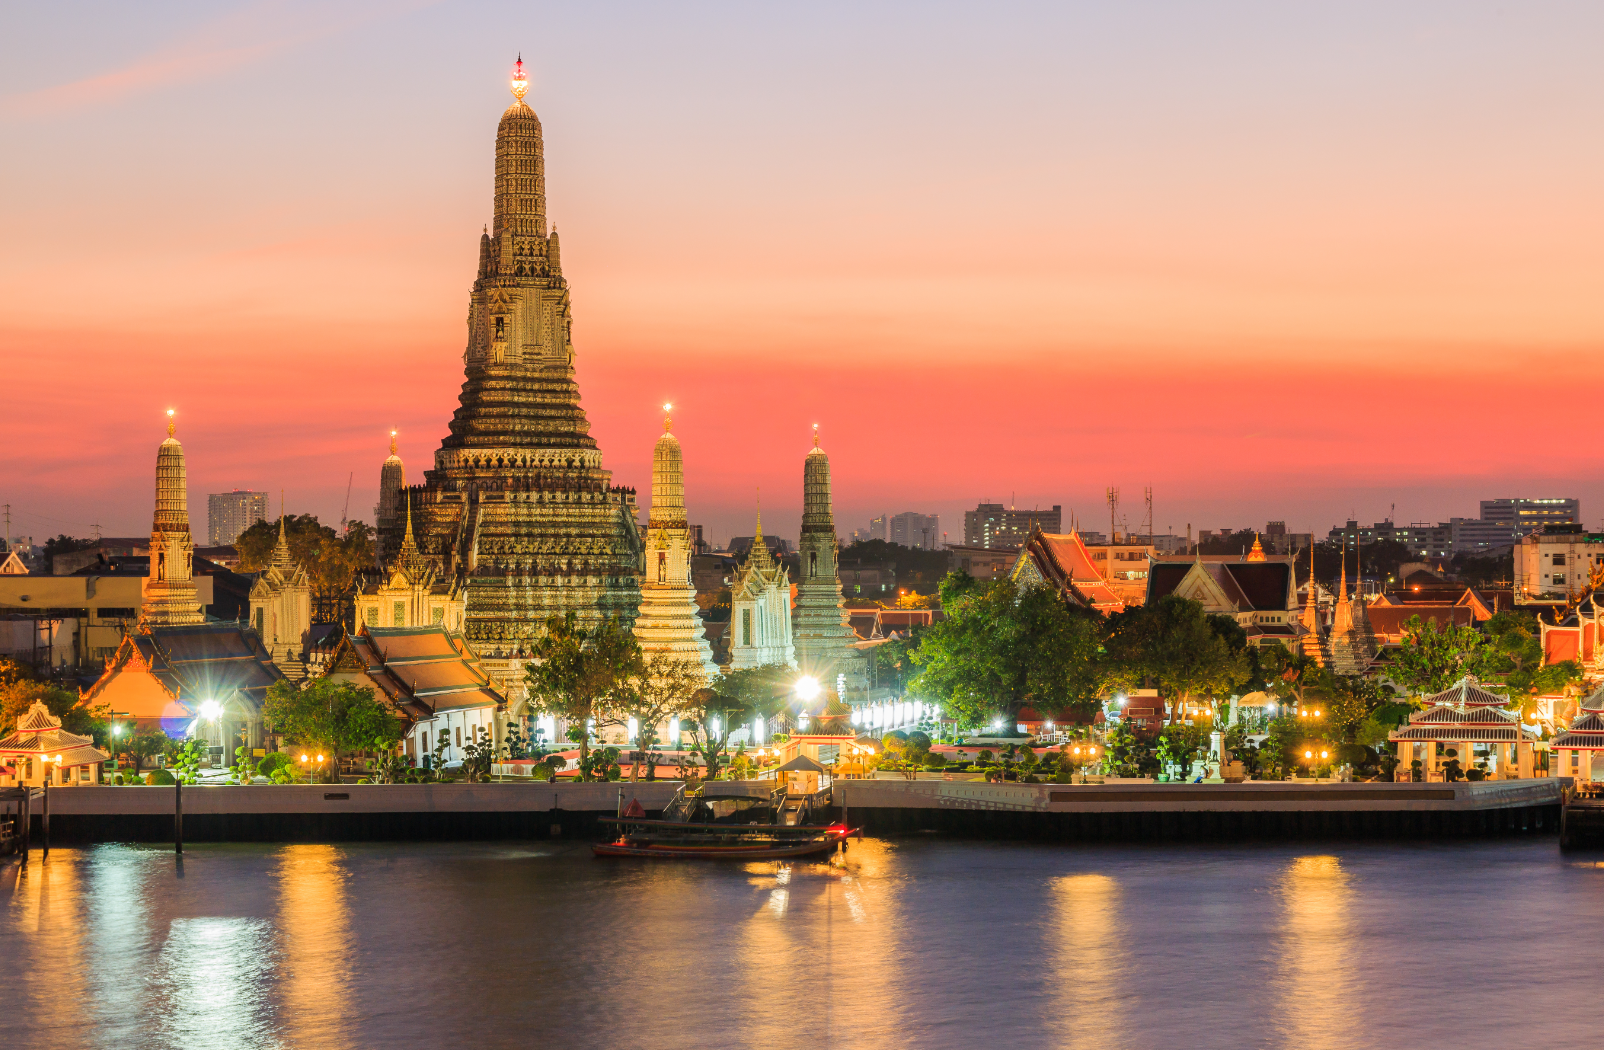 Thailand launches a new medical coverage scheme for tourist accidents